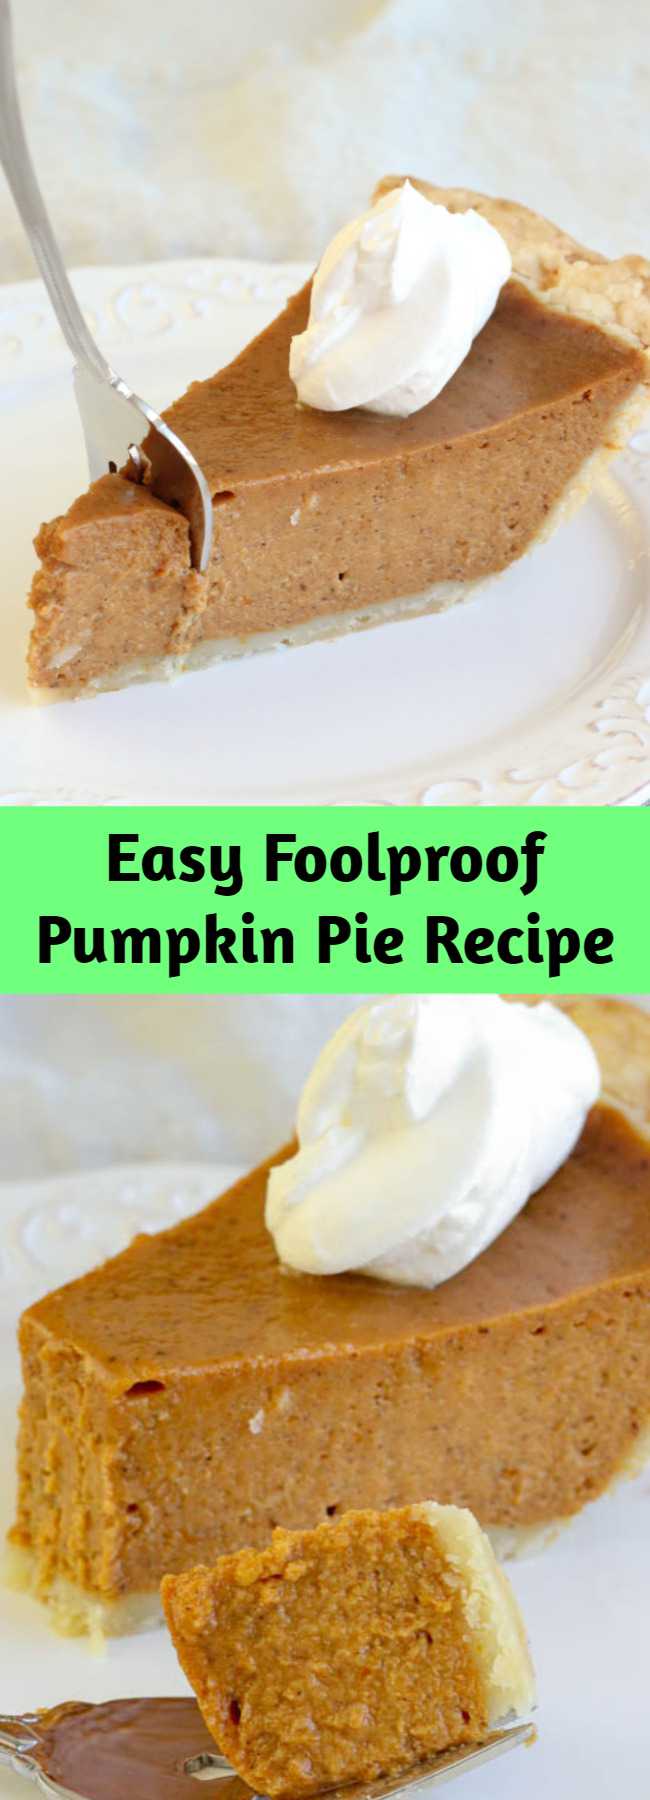 Easy Foolproof Pumpkin Pie Recipe - The best and easiest Pumpkin Pie recipe I've tried! It's creamy with the perfect amount of spice! This Pumpkin Pie will soon be a family favorite!